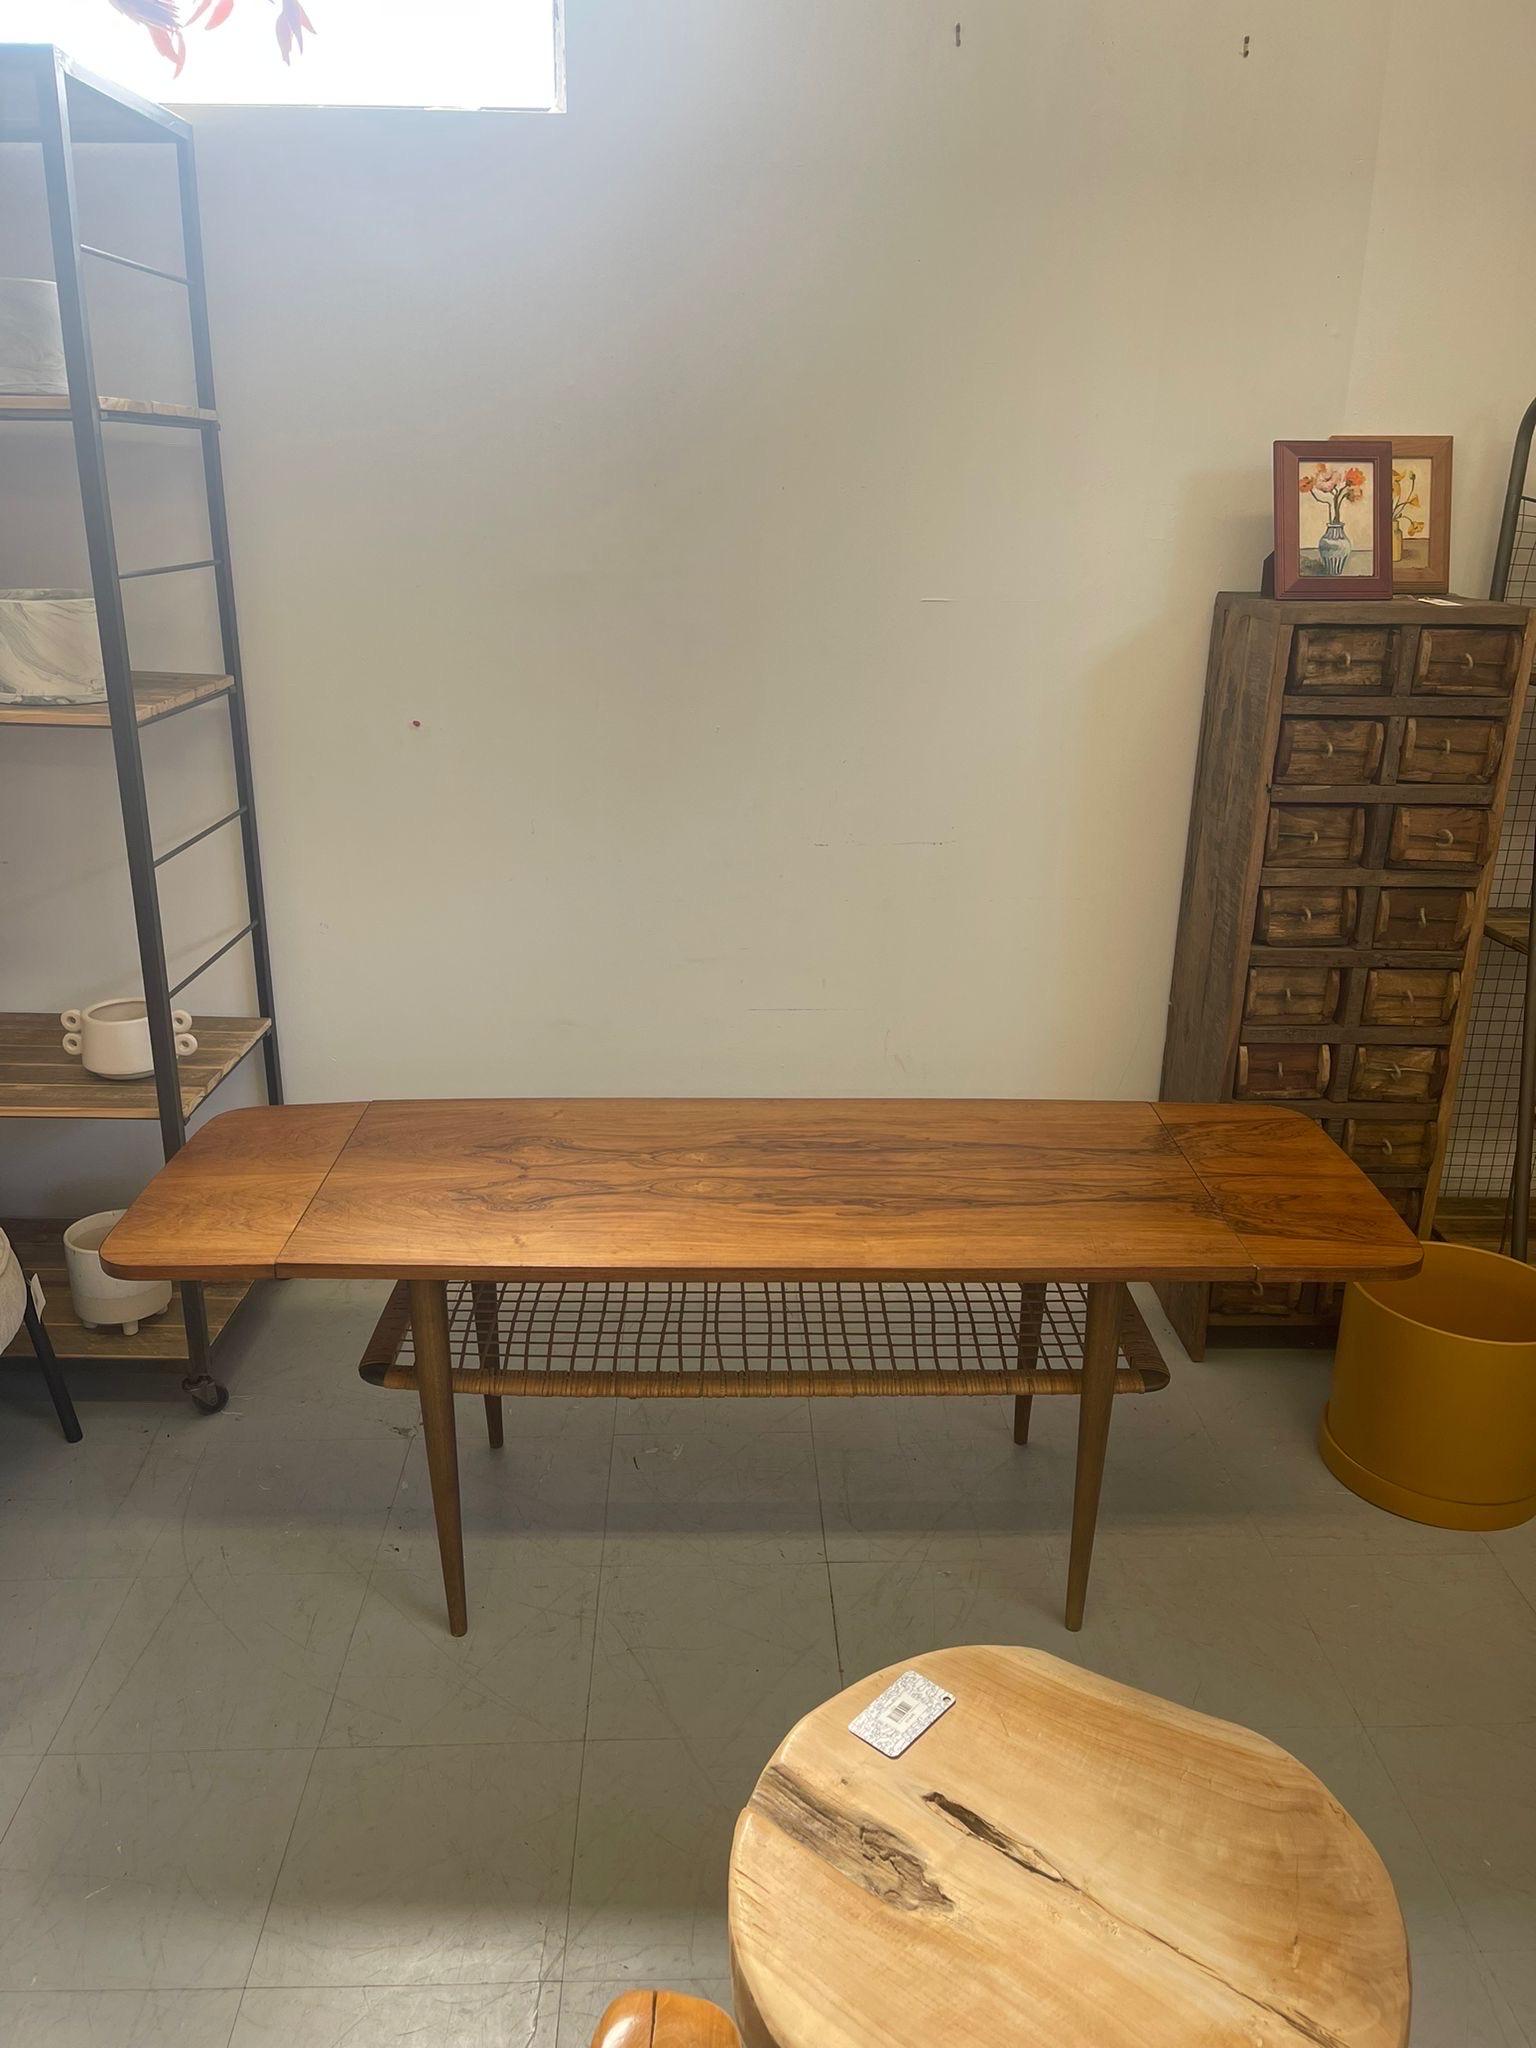 Coffee Table with Symmetrical Wood Grain. Lower Shelf is Wicker, wrapped around Sides.Tapered Legs. Vintage Condition Consistent with age. Wear and Tear as pictured

Dimensions. 61 W ; 20 D ; 25 H
Lower Shelf. 40 W ; 14 D